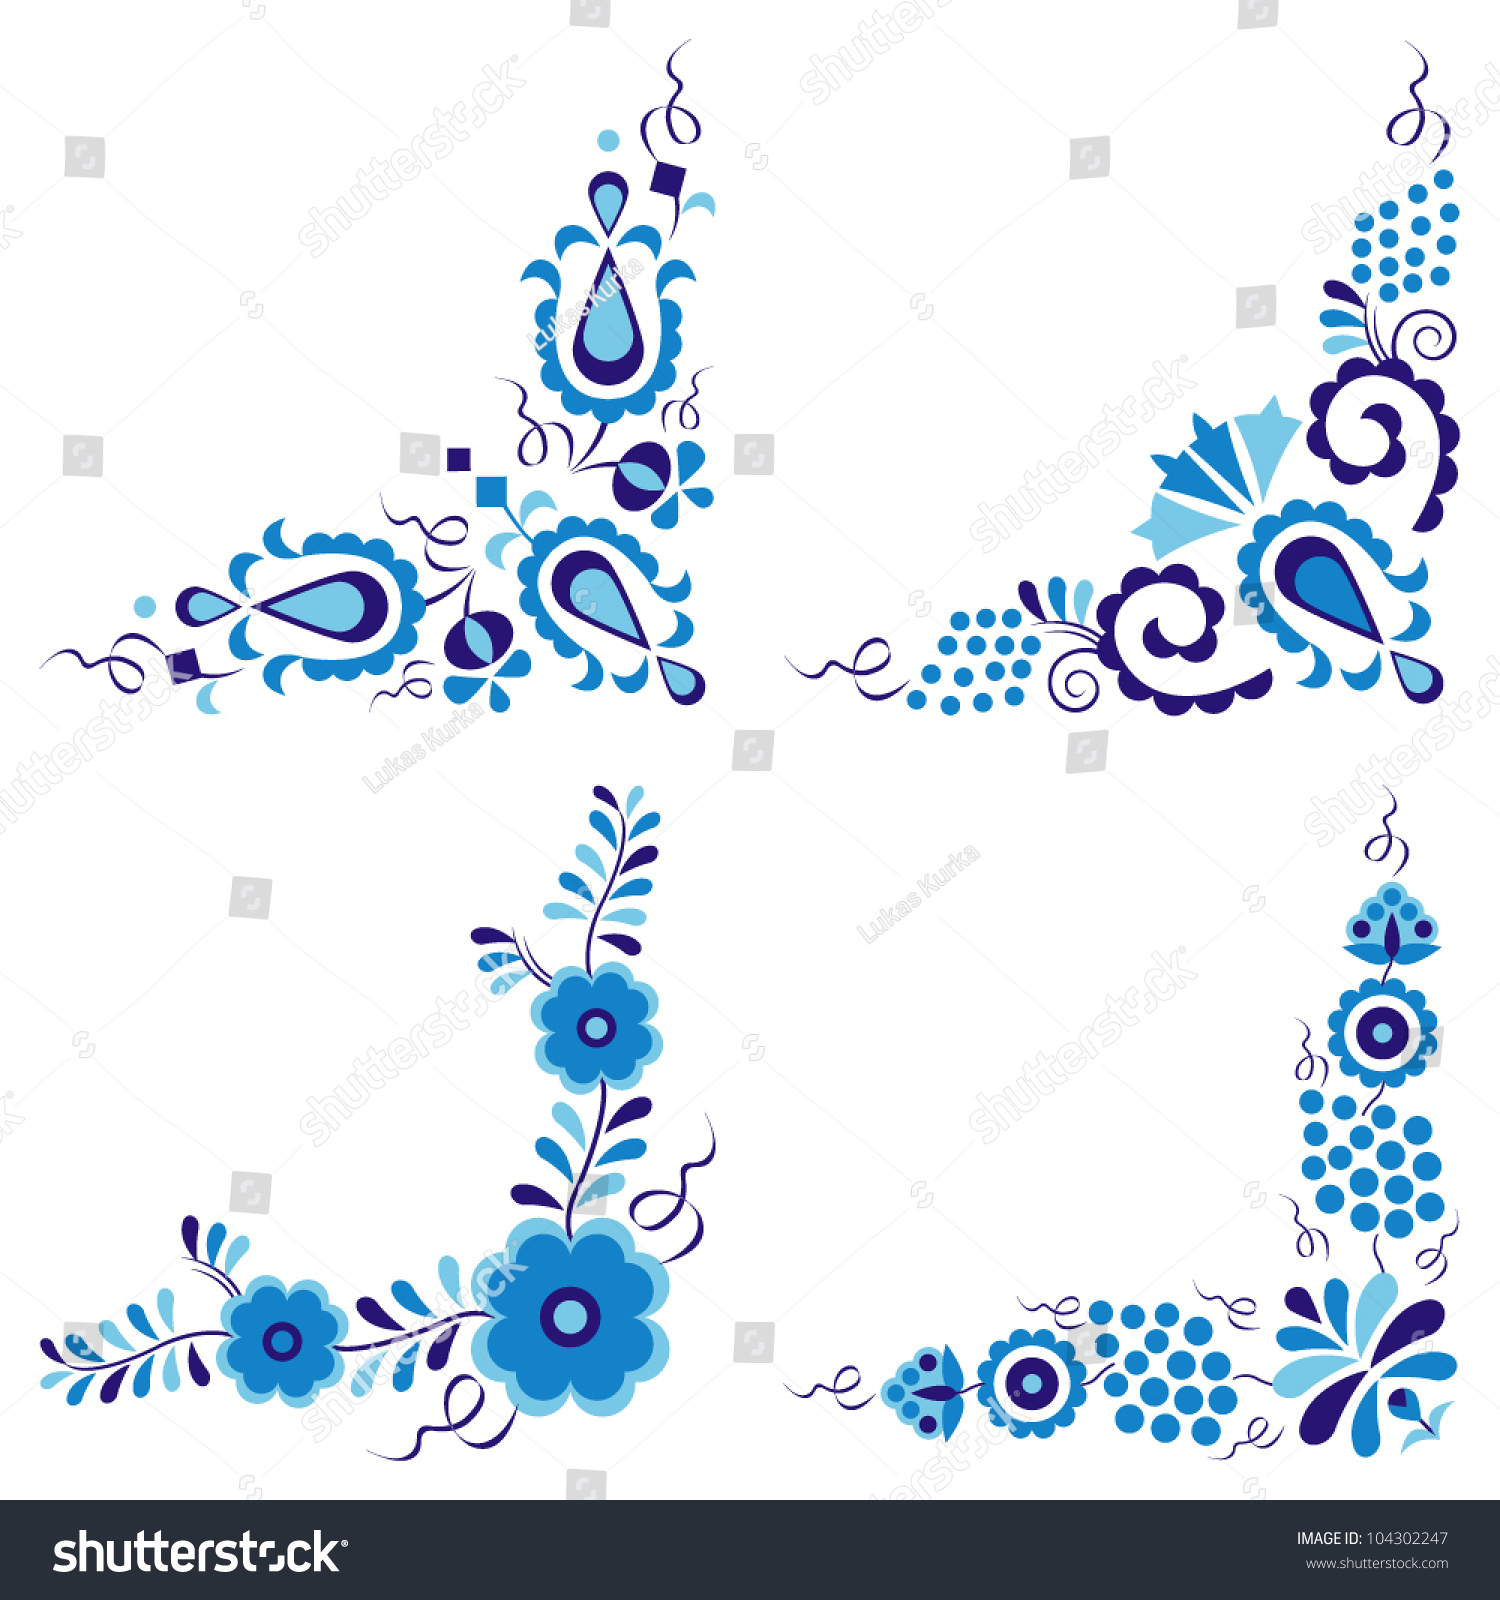 Traditional Folk Patterns Isolated On White Background Stock Vector ...